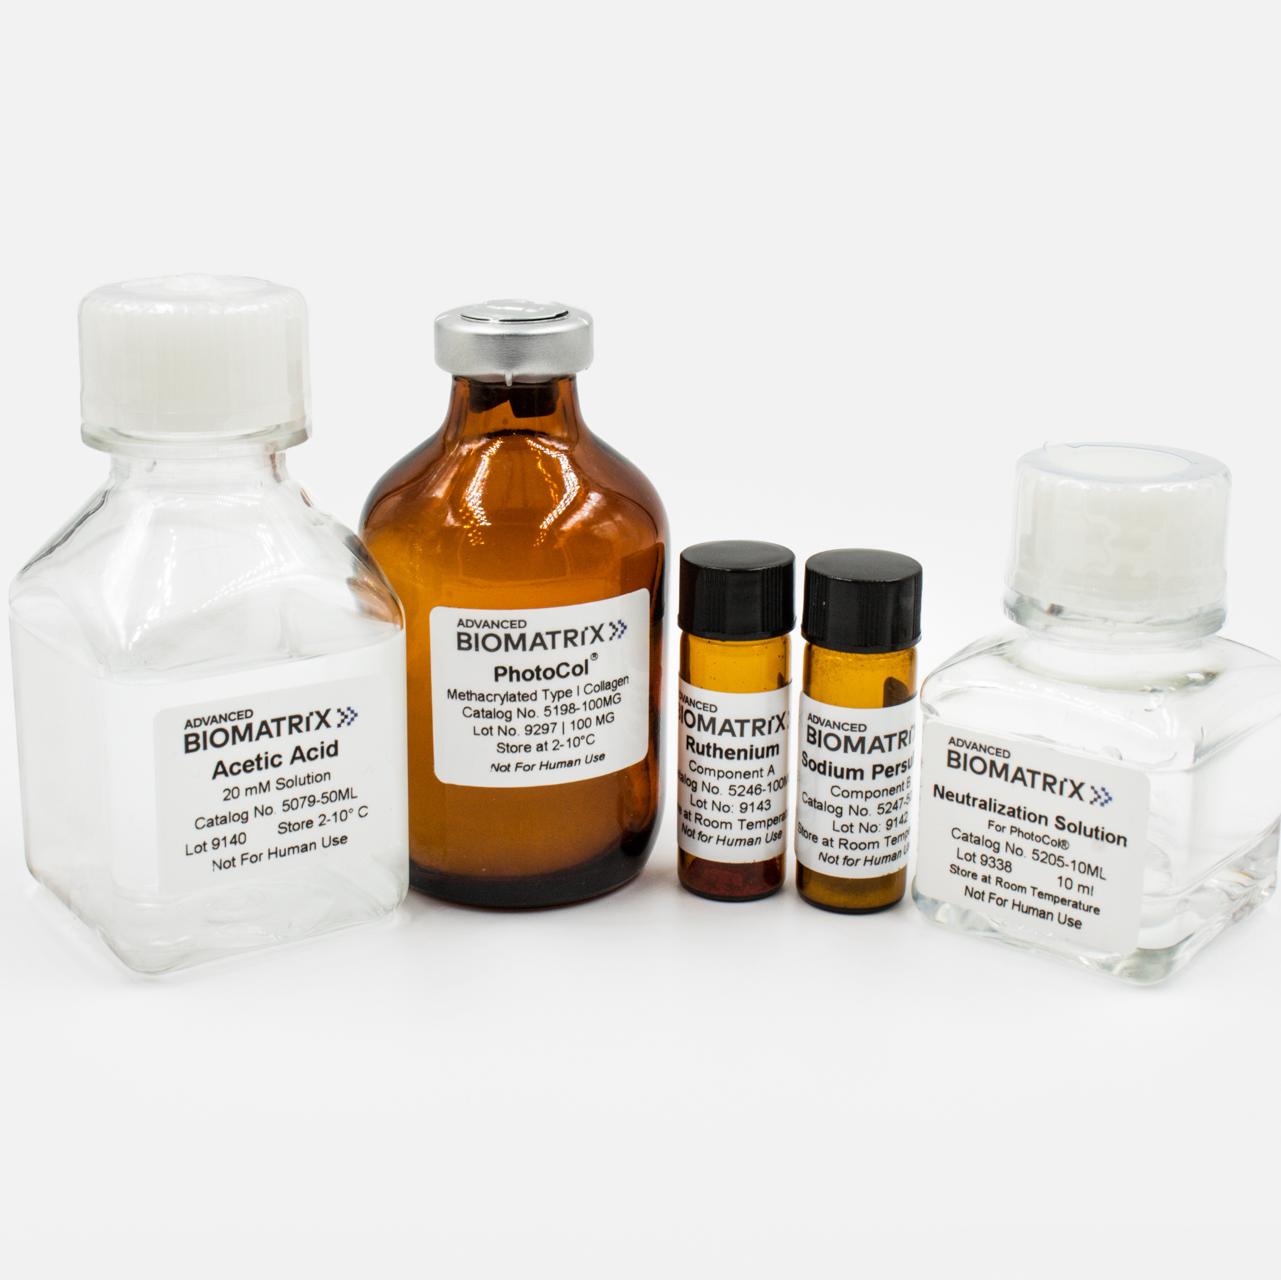 PhotoCol Methacrylated Collagen with Ruthenium Kit